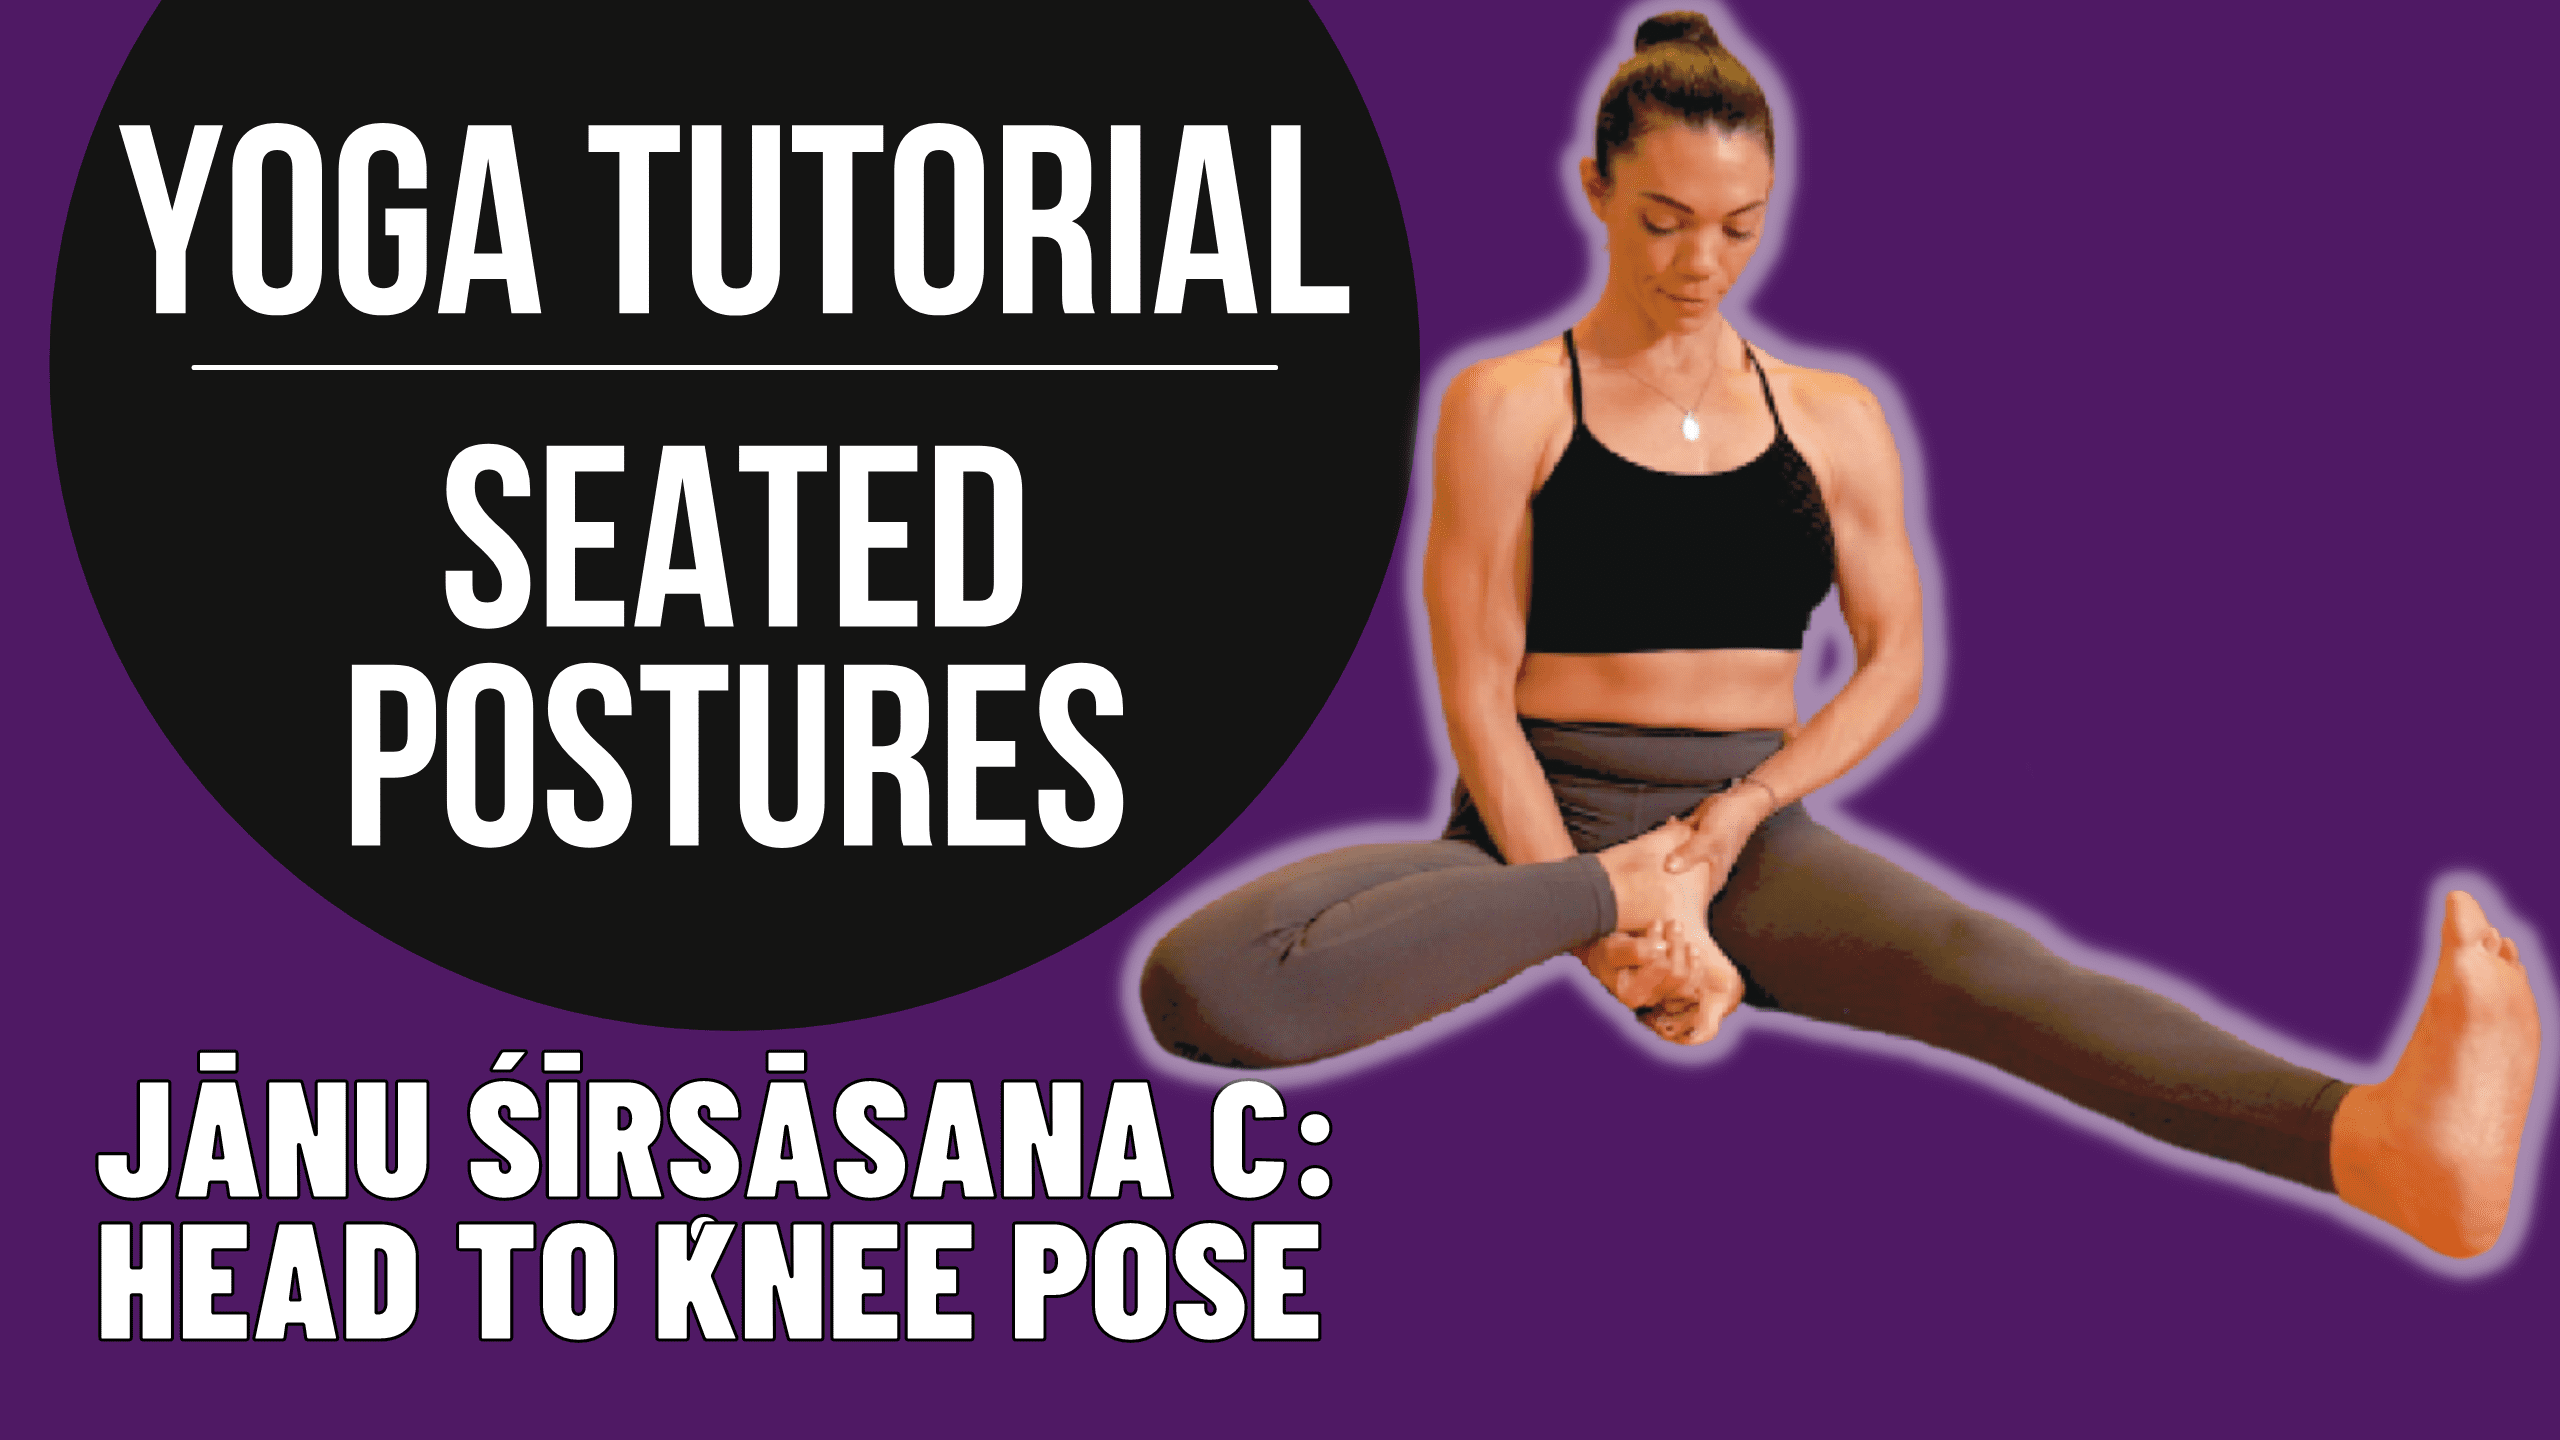 Yoga head to knee pose stock photo. Image of extension - 33928808